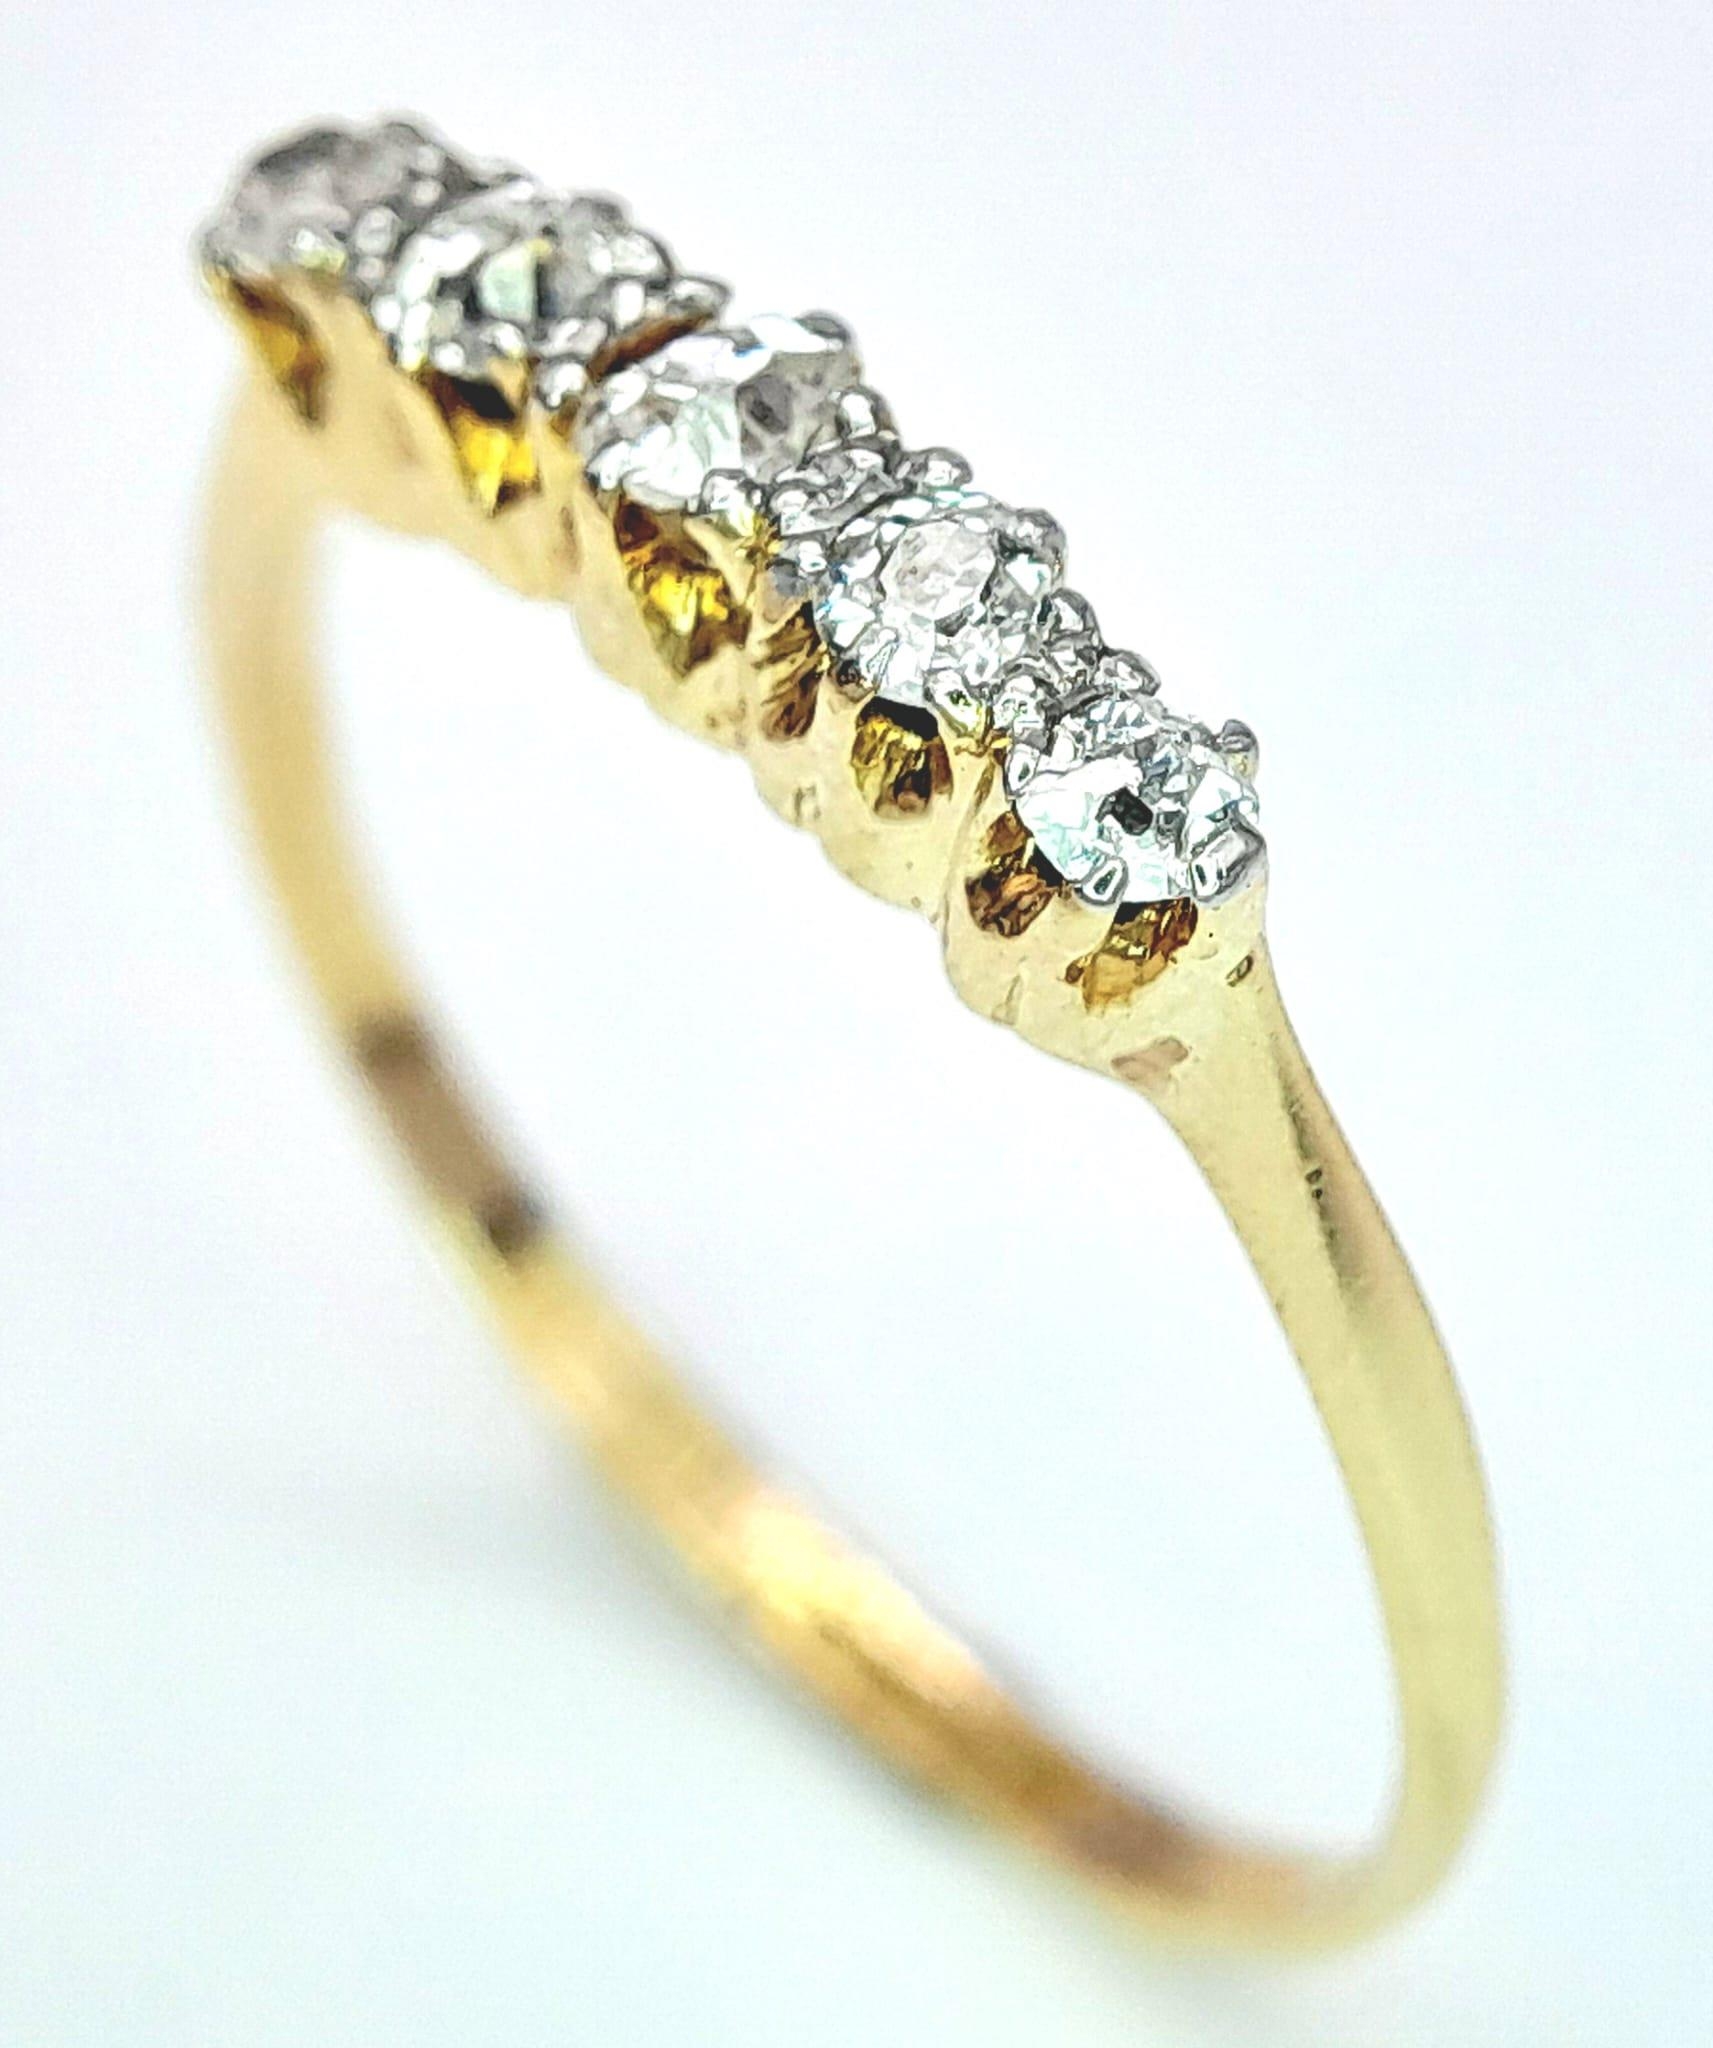 An 18K Yellow Gold and Platinum Vintage Old Cut Diamond 5 Stone Ring. 0.20ctw, Size M, 1.5g total - Image 4 of 11